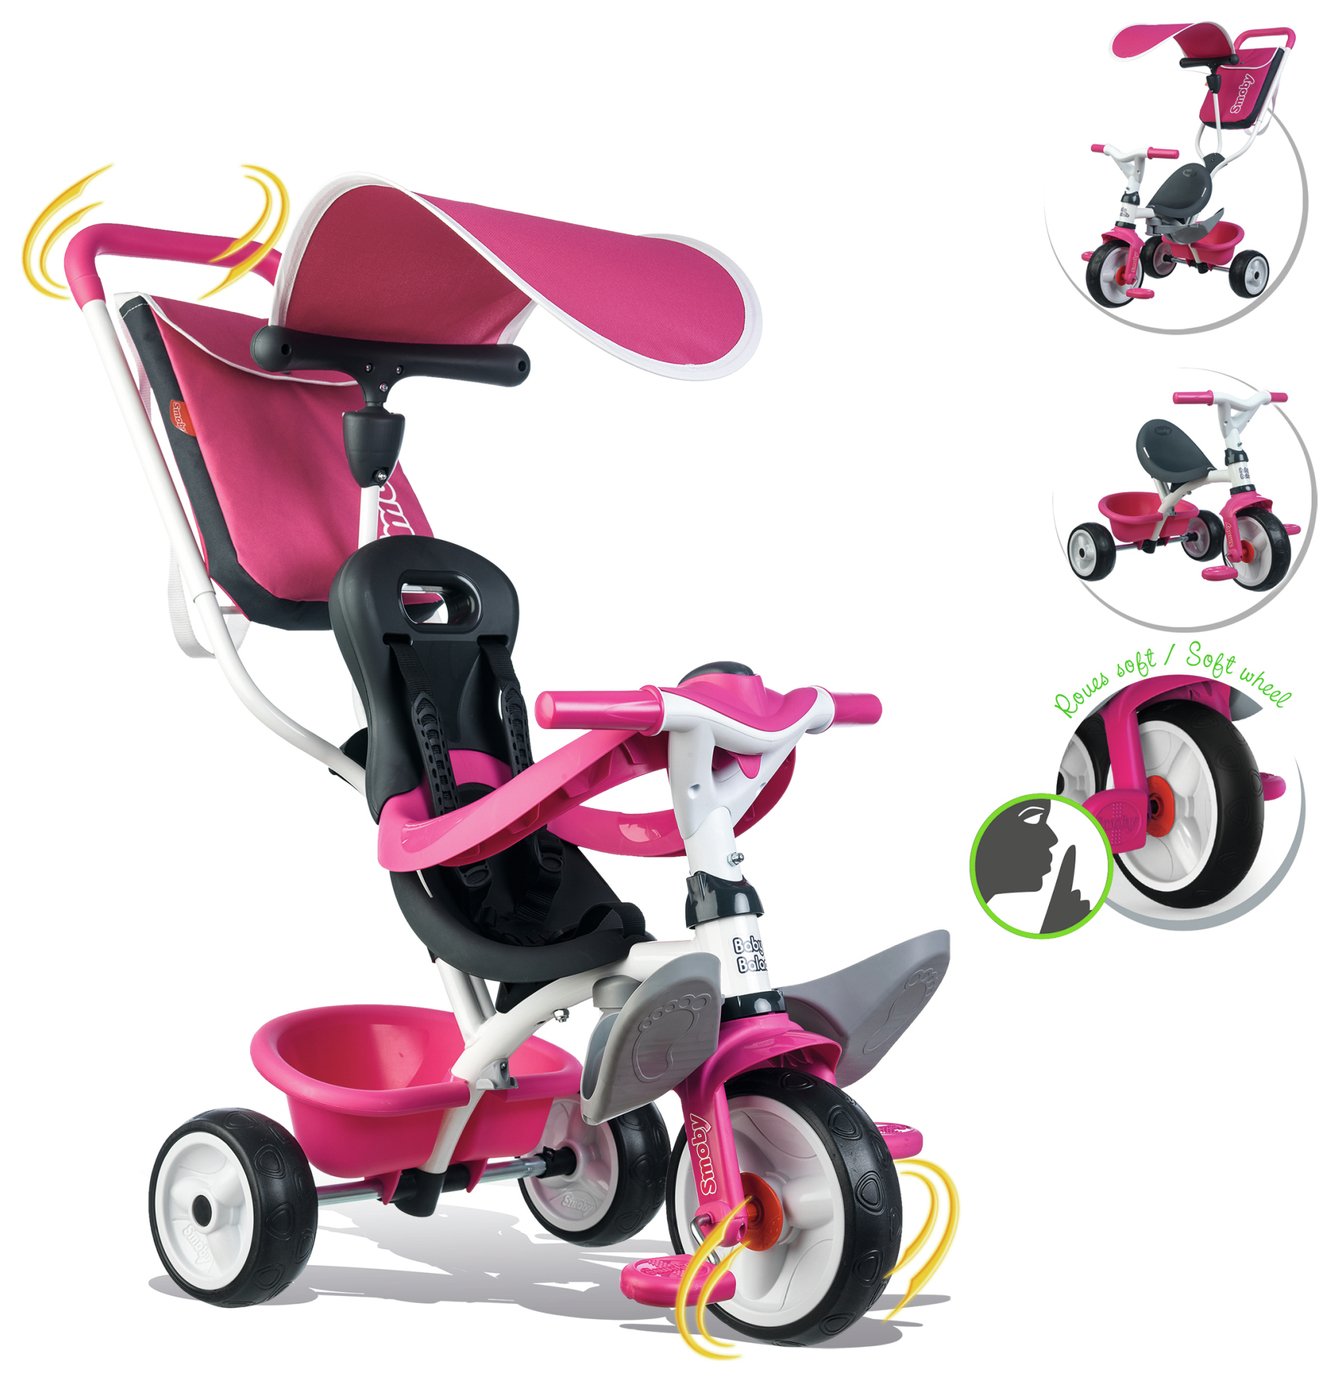 Smoby 3 in 1 Trike Review